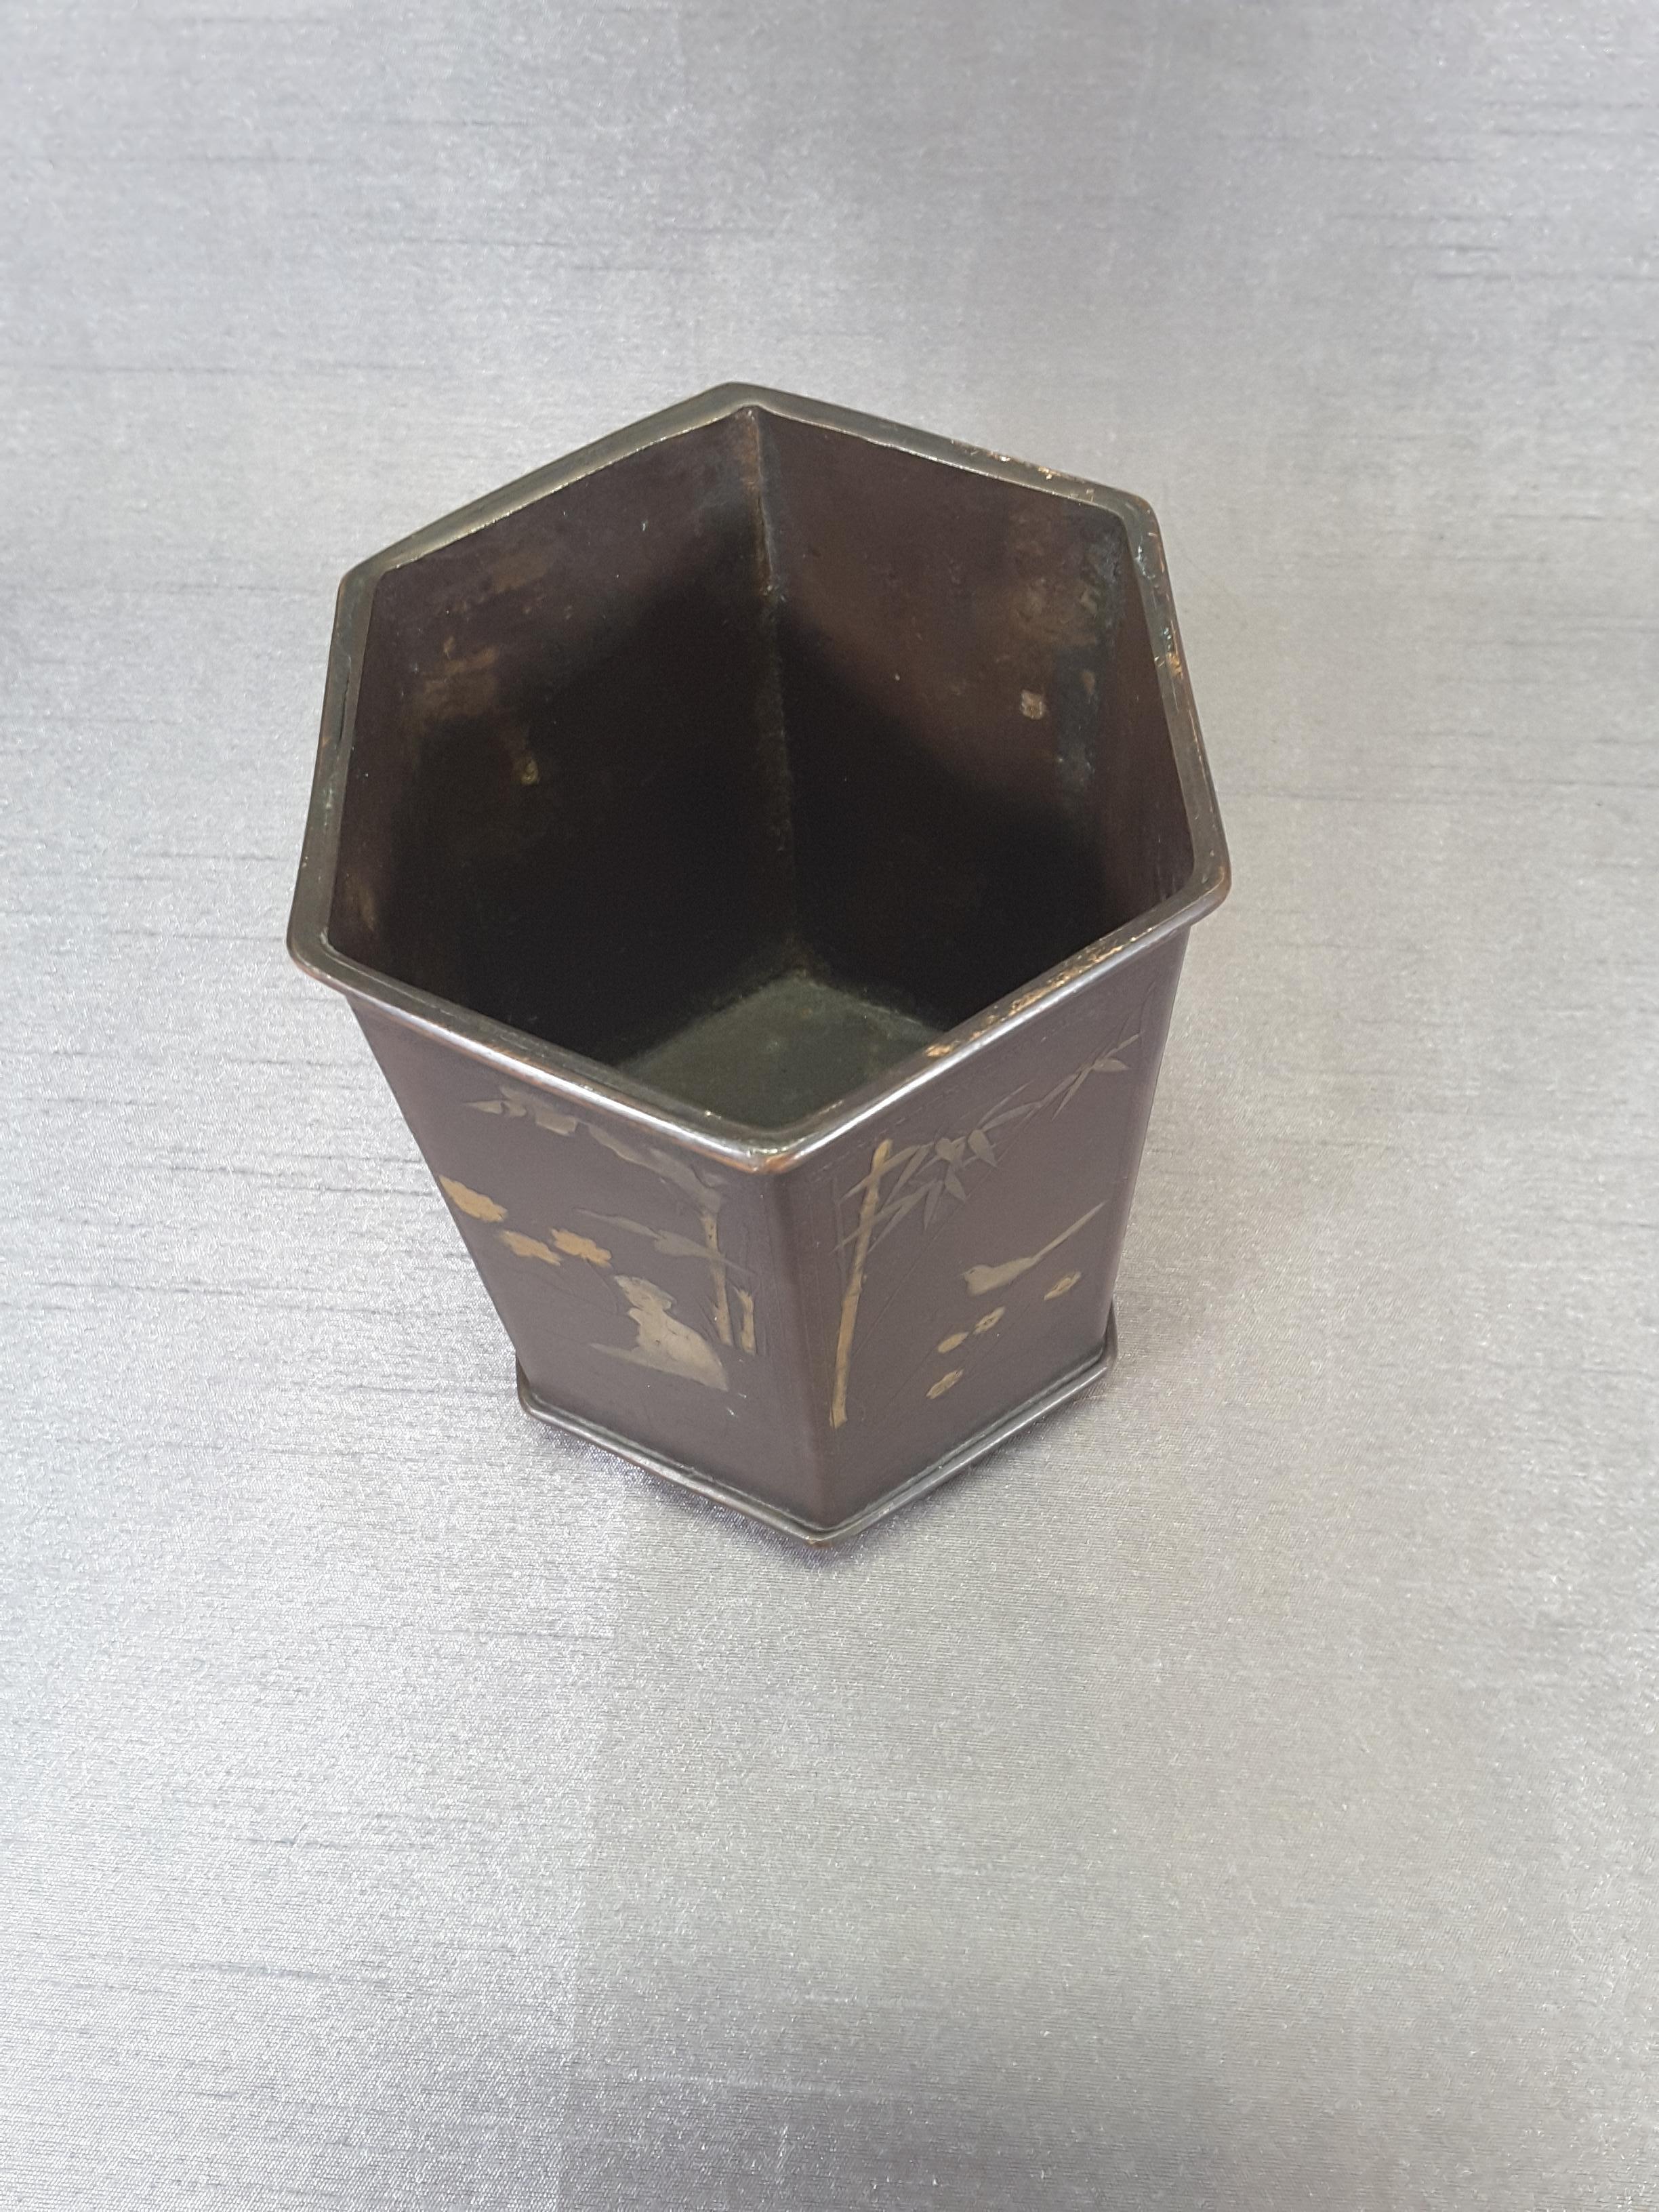 Meiji period (1868-1912) signed bronze and mixed metal bonsai planter or brush pot, polygon shaped (six sided) decorated with different scenes on each panel, decorated with female figures, birds, bamboo trees, flowers, etc. The top has a rolled top